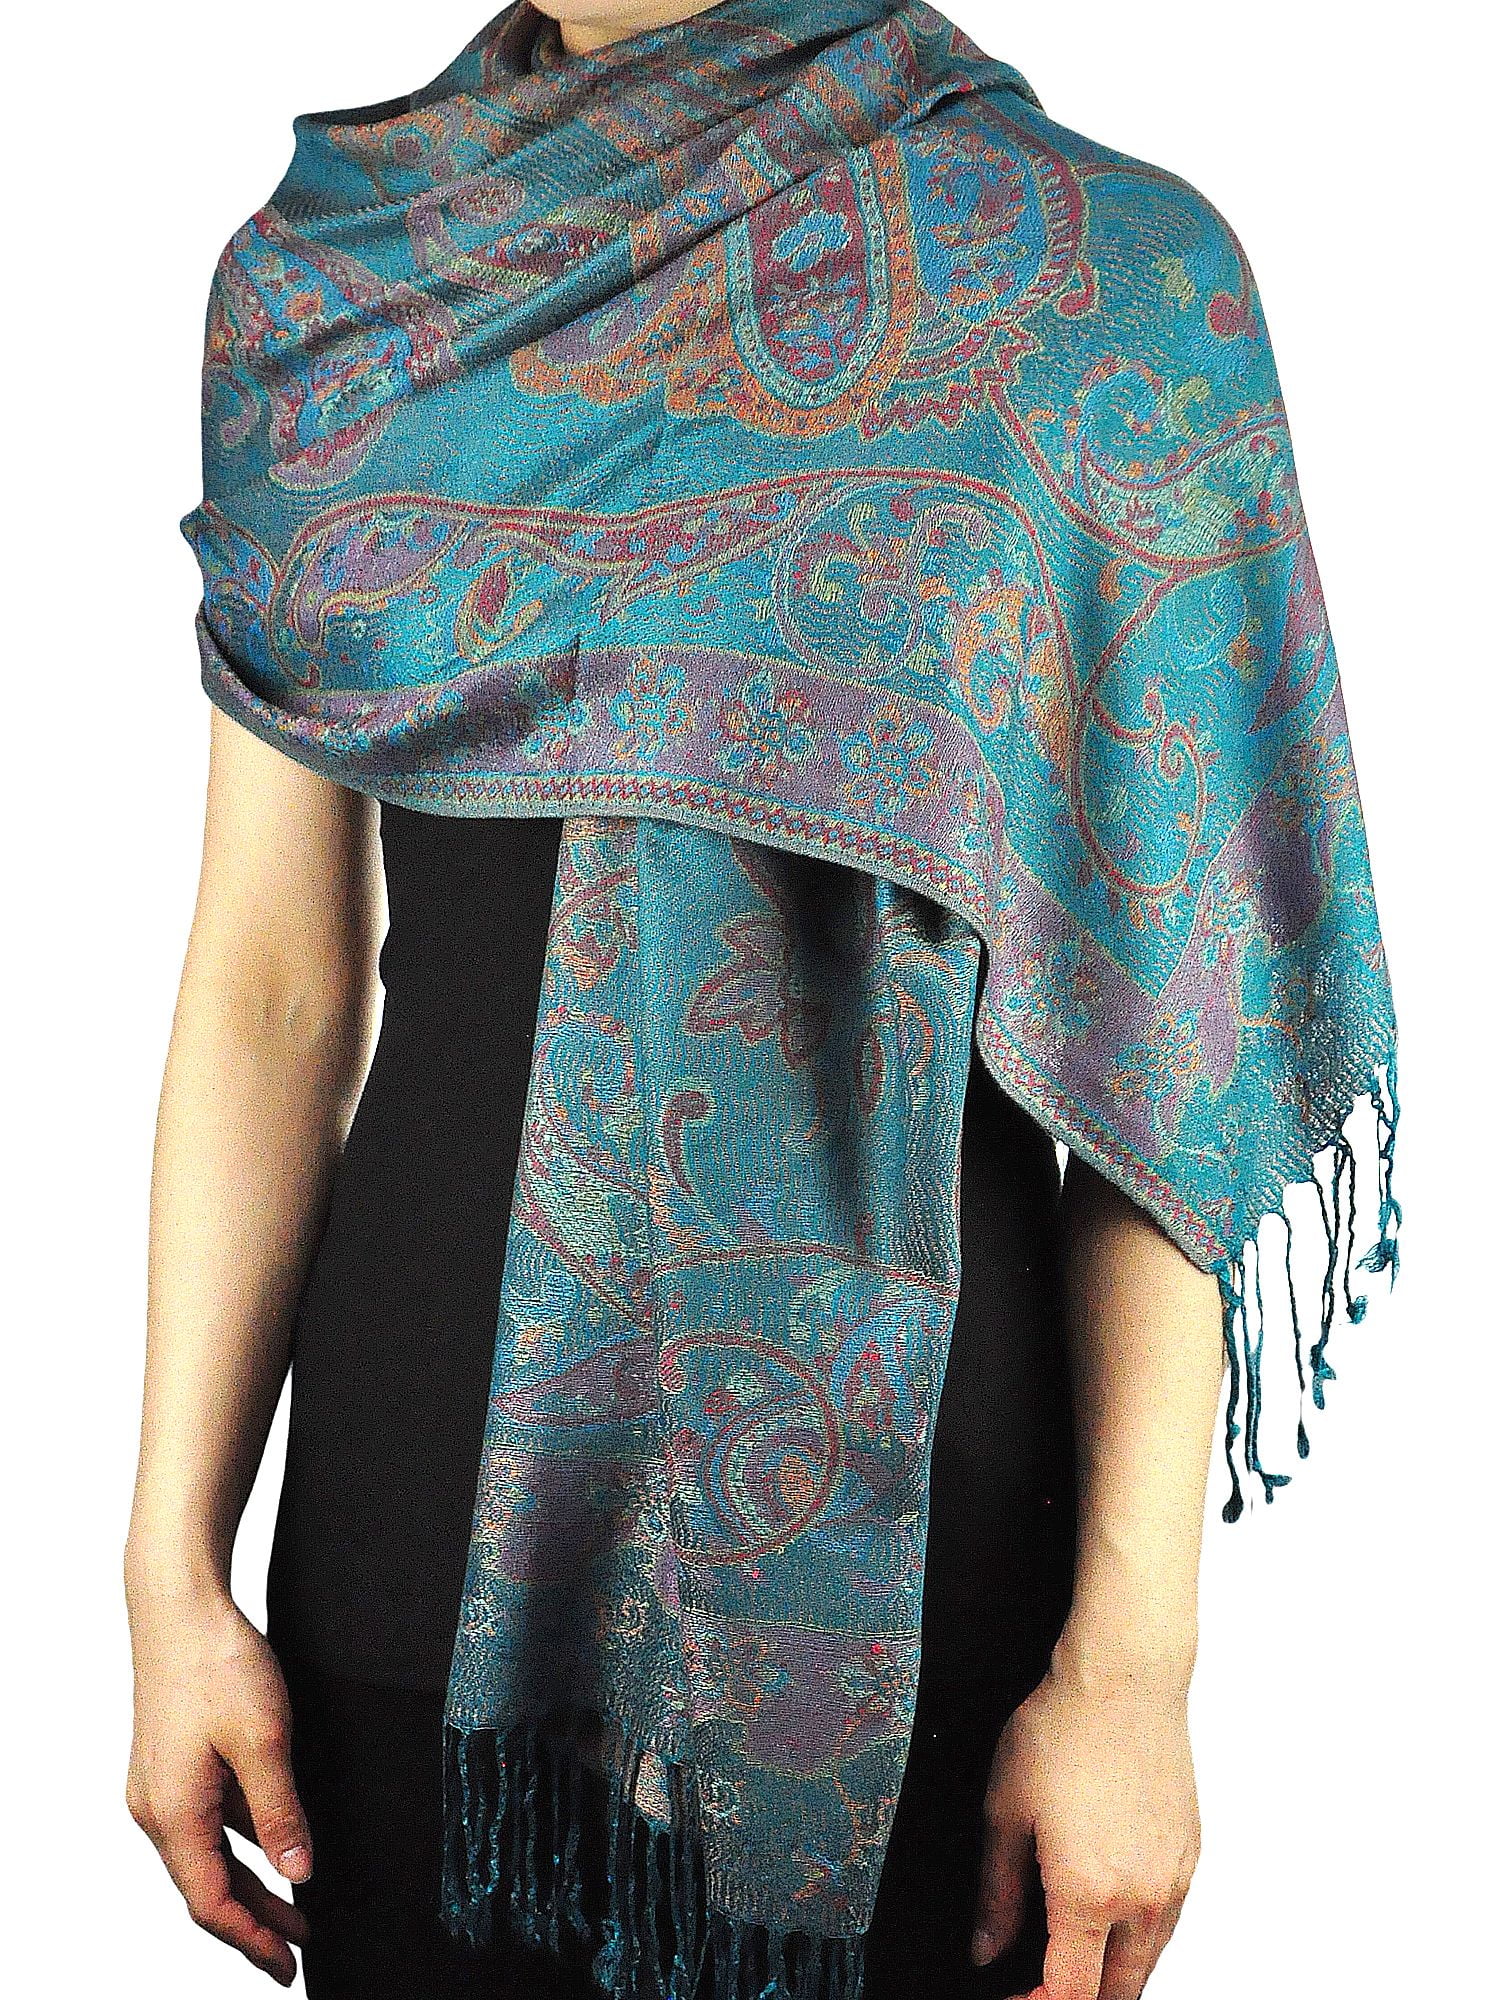 12 scarves wholesale paisley flower winter thick warm women gift shawl